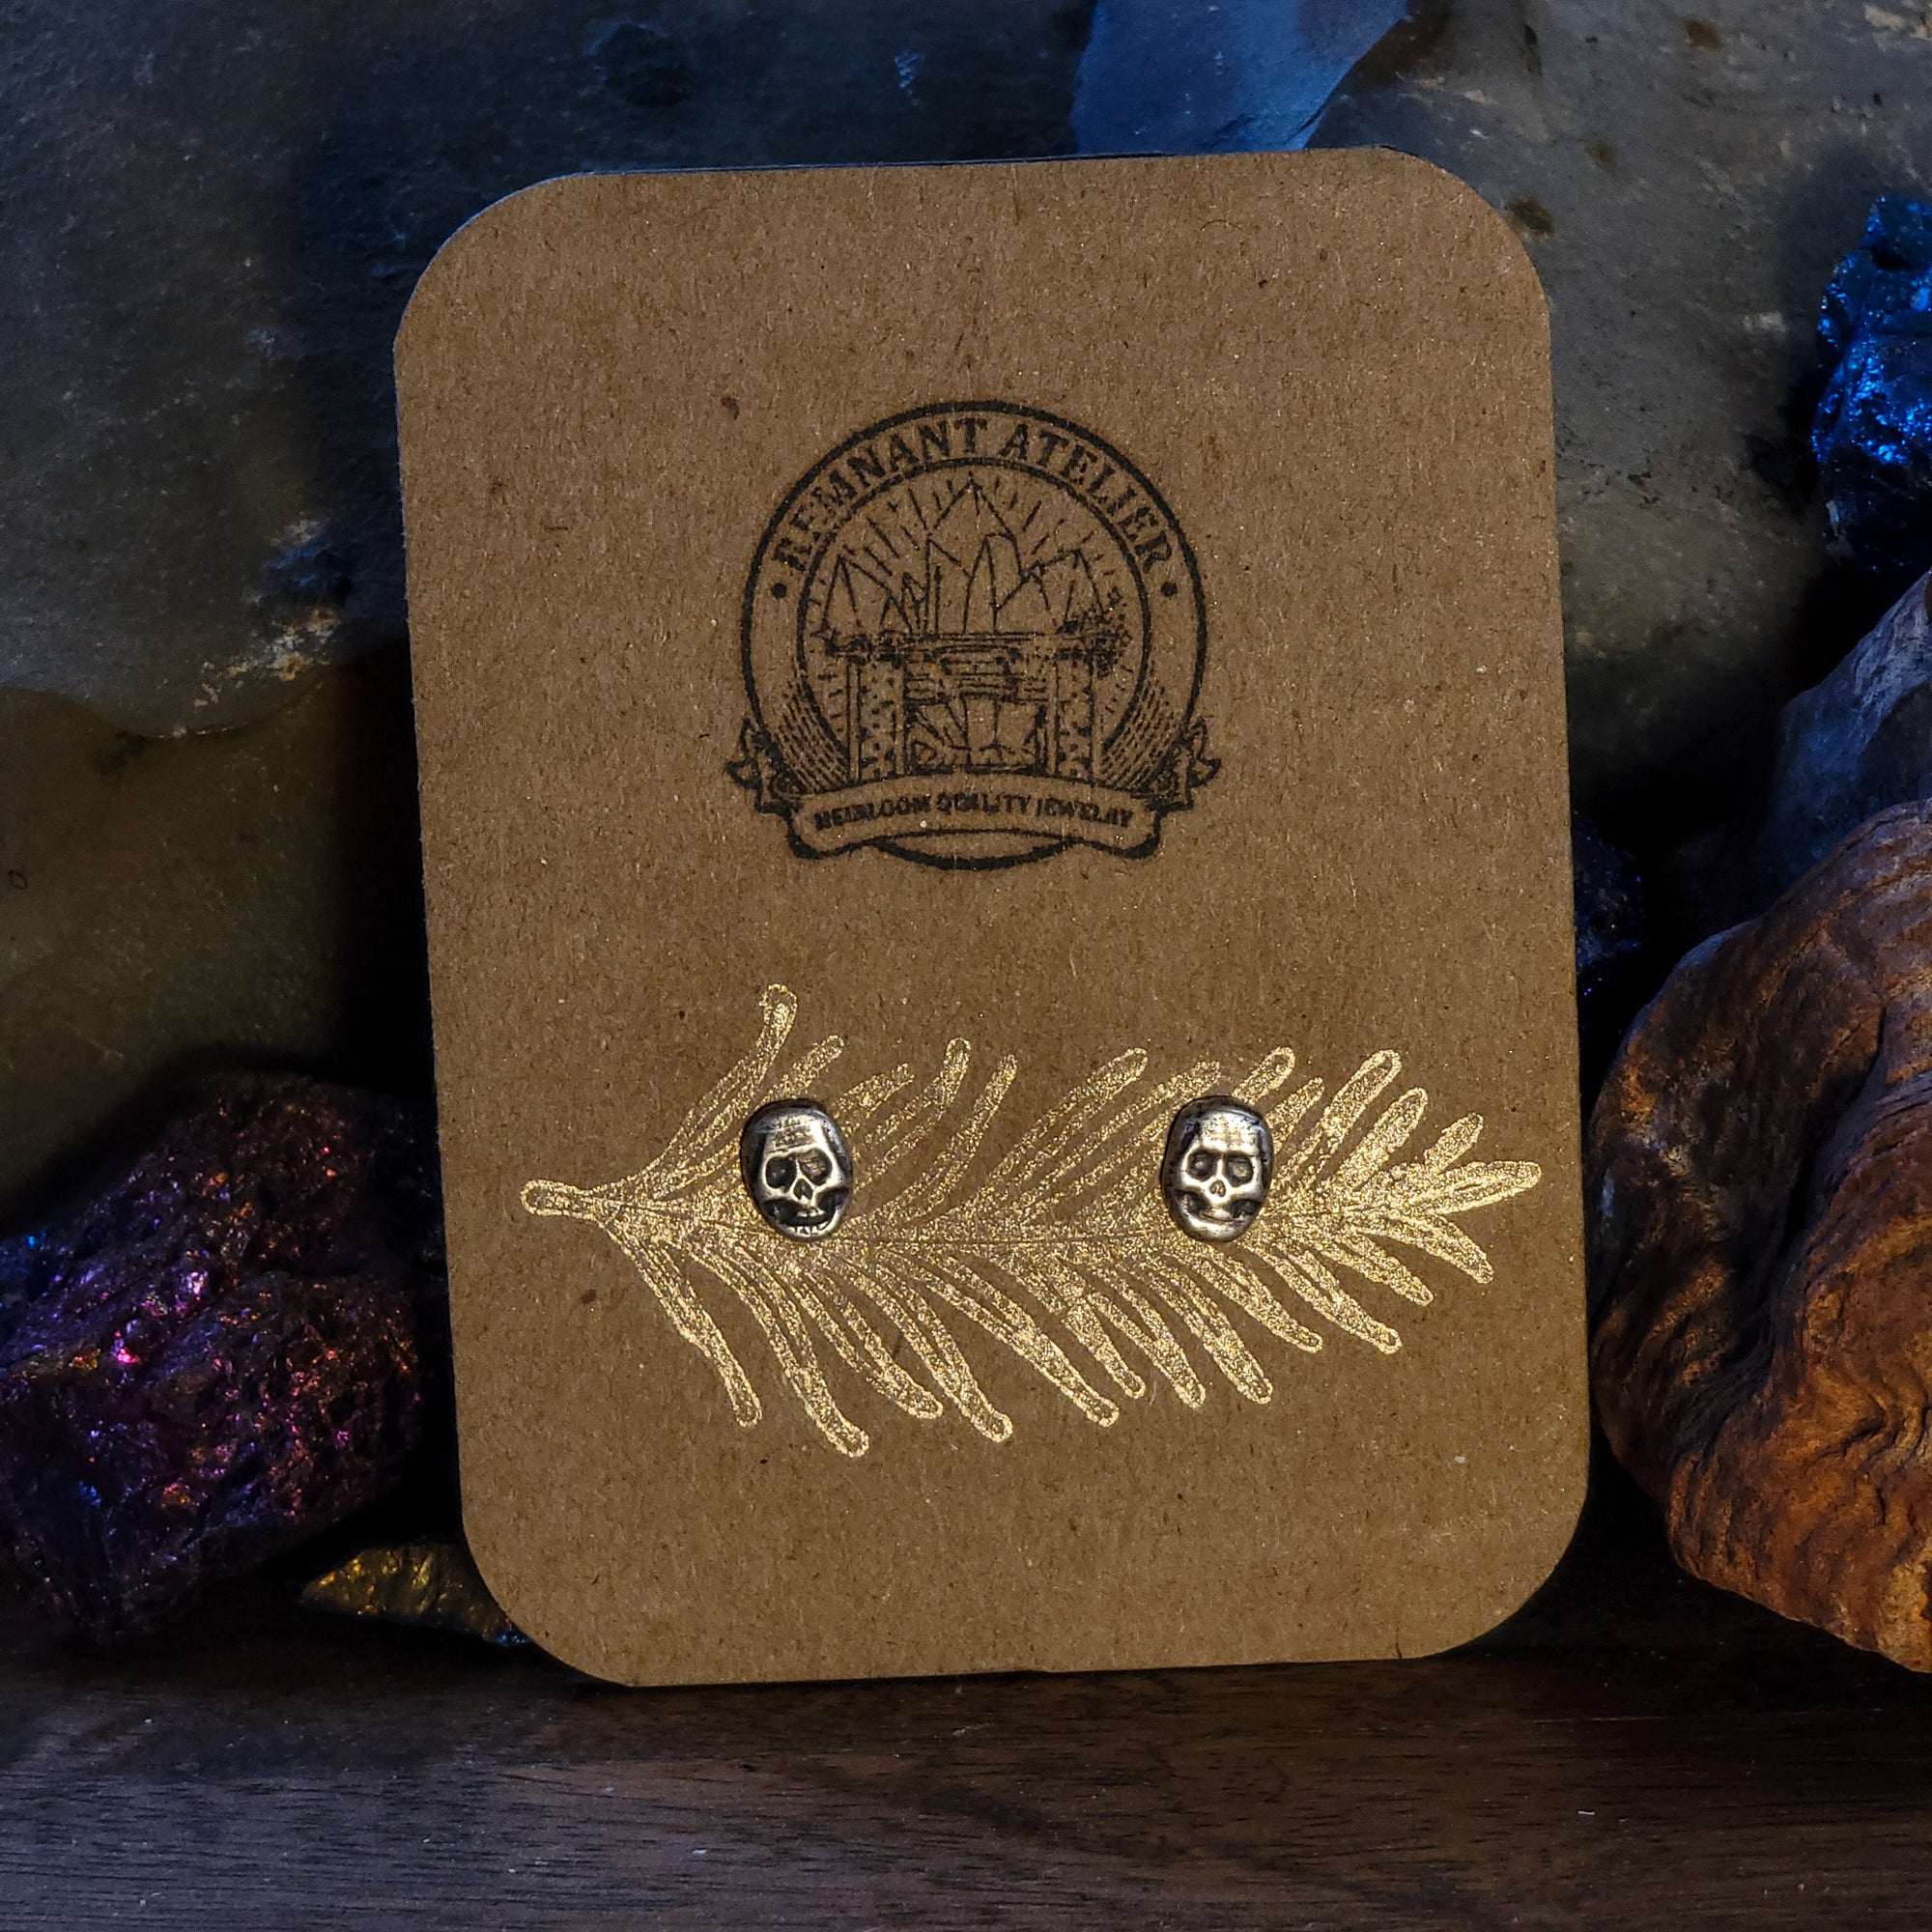 A pair of handmade sterling silver stud earrings in the shape of skulls are displayed on a cardboard earring card, resting on glittering crystals. A unique and striking piece of jewelry perfect for those who love the gothic aesthetic.